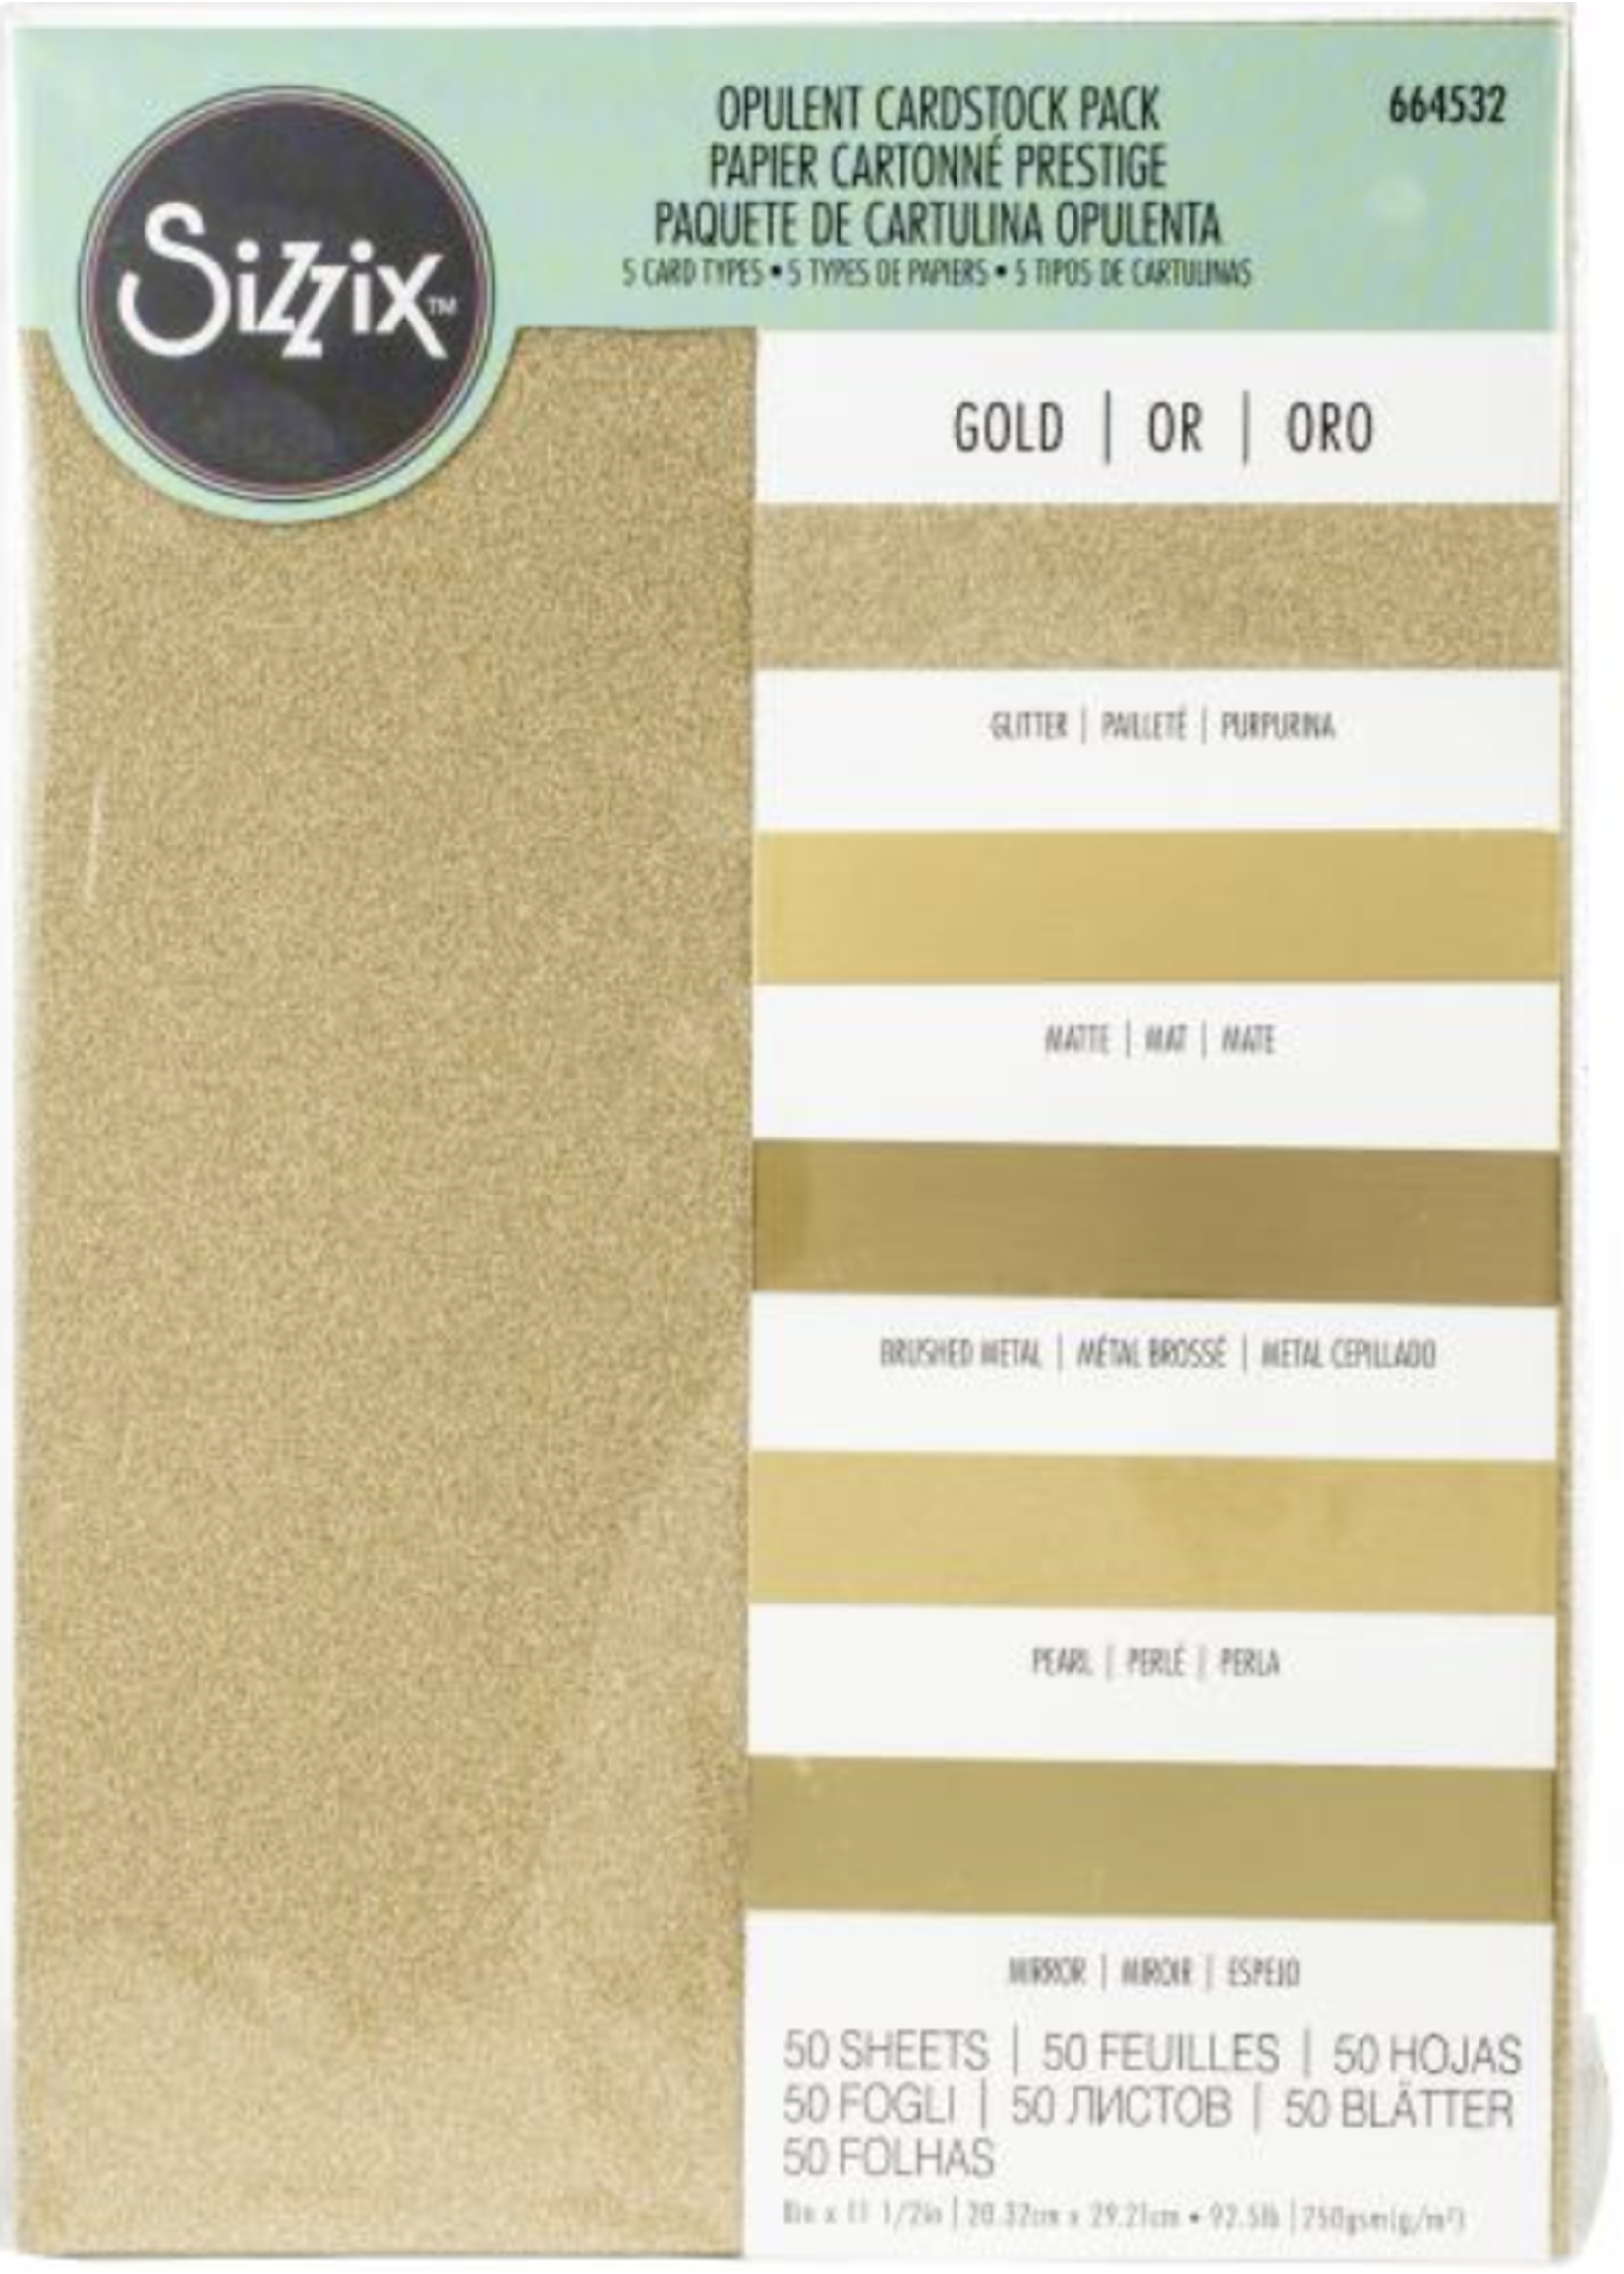 Sizzix Opulent Cardstock Pack: Gold